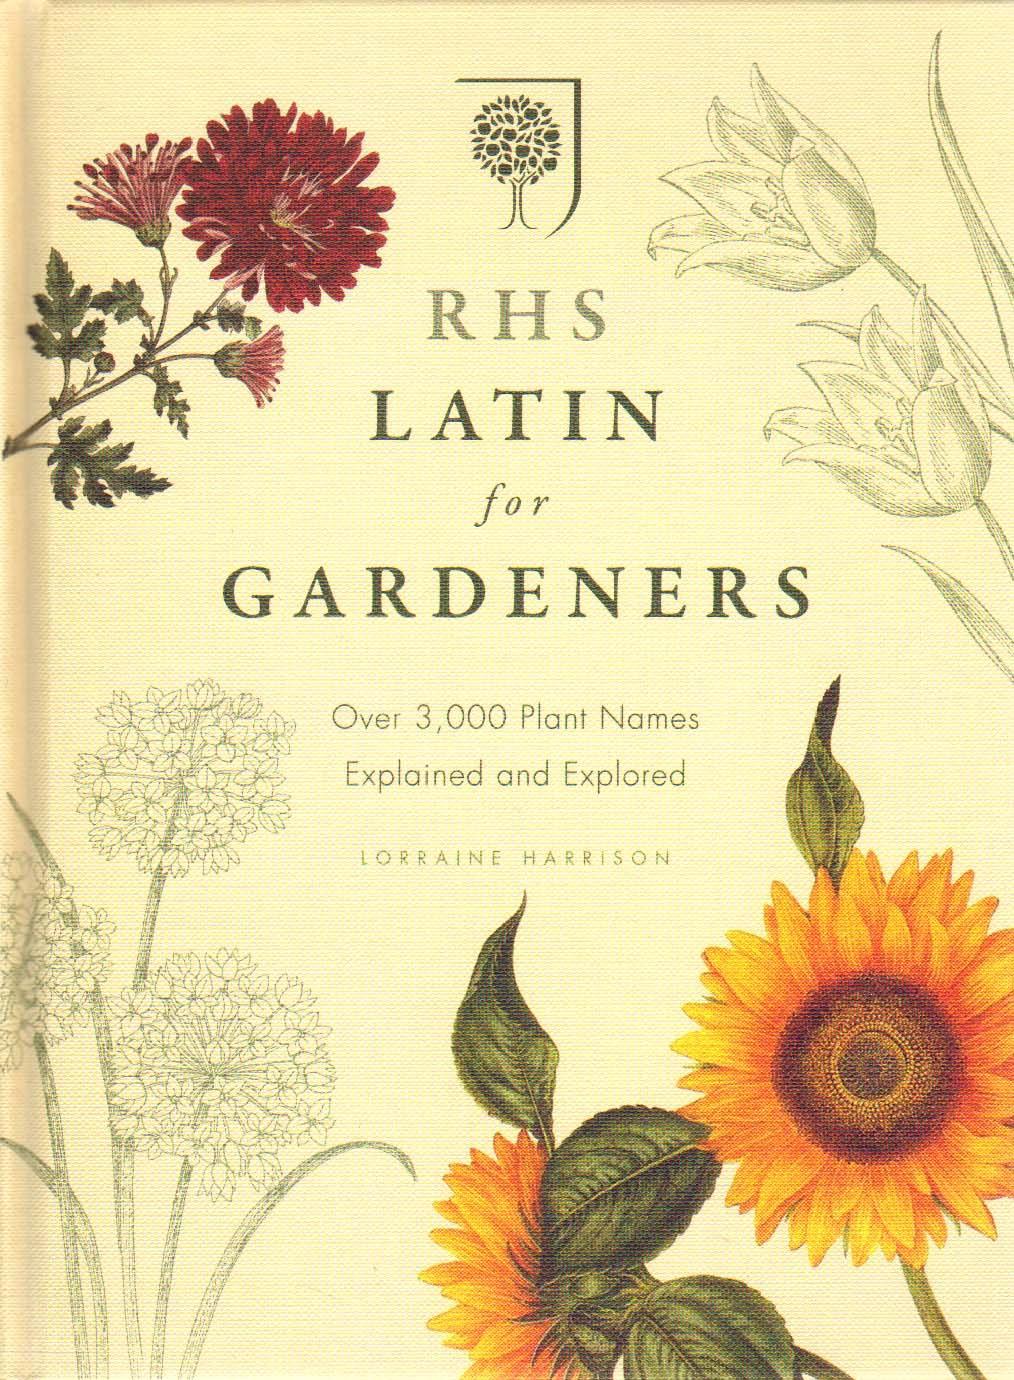 RHS Latin for Gardeners - The Royal Horticultural Society 